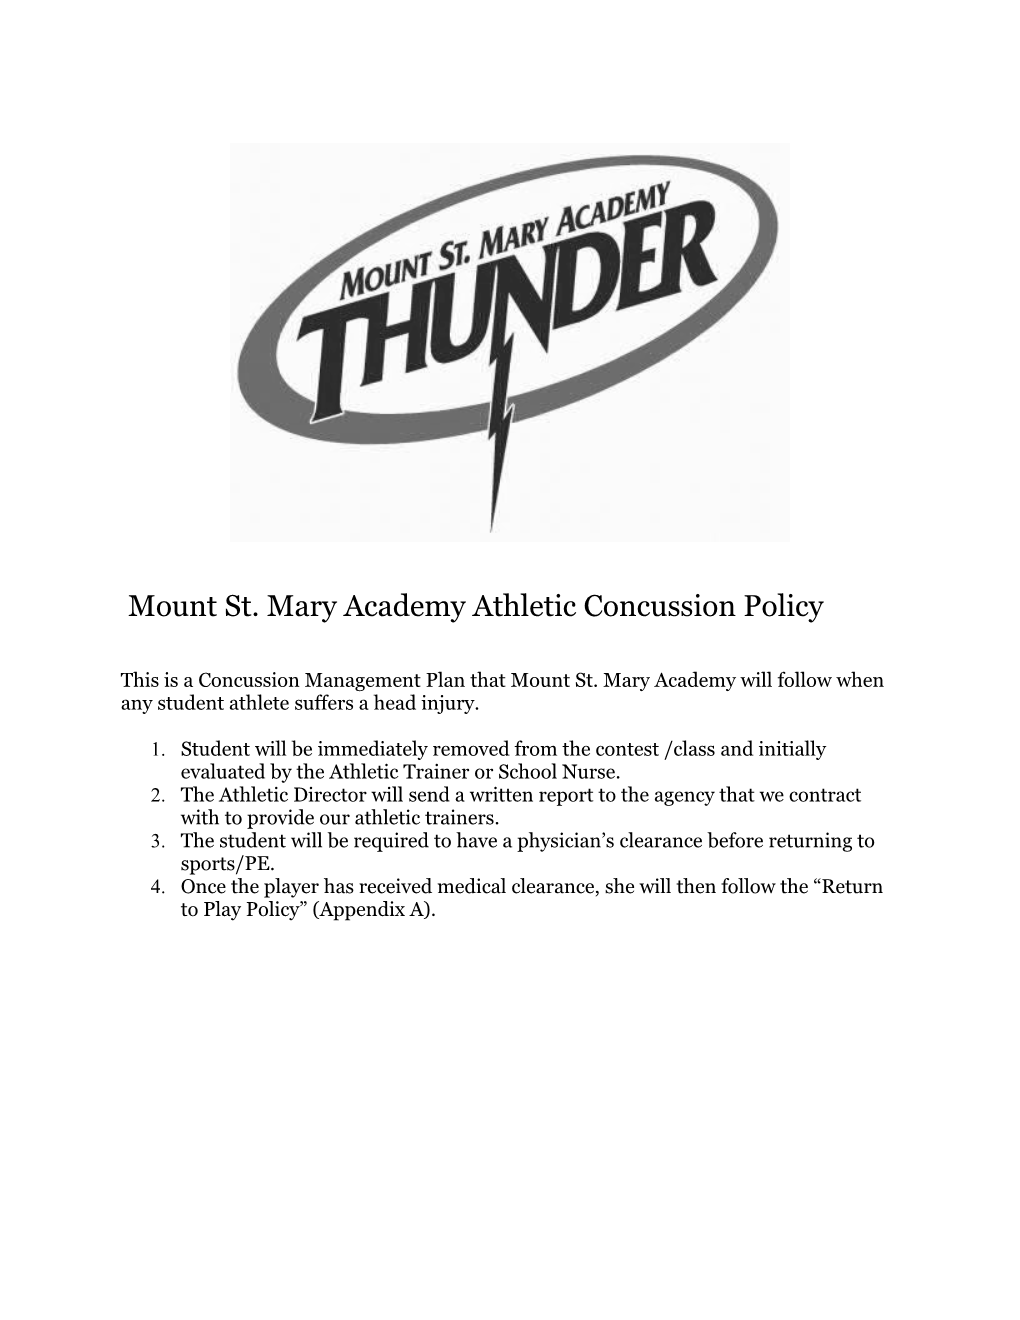 Mount St. Mary Academy Athletic Concussion Policy